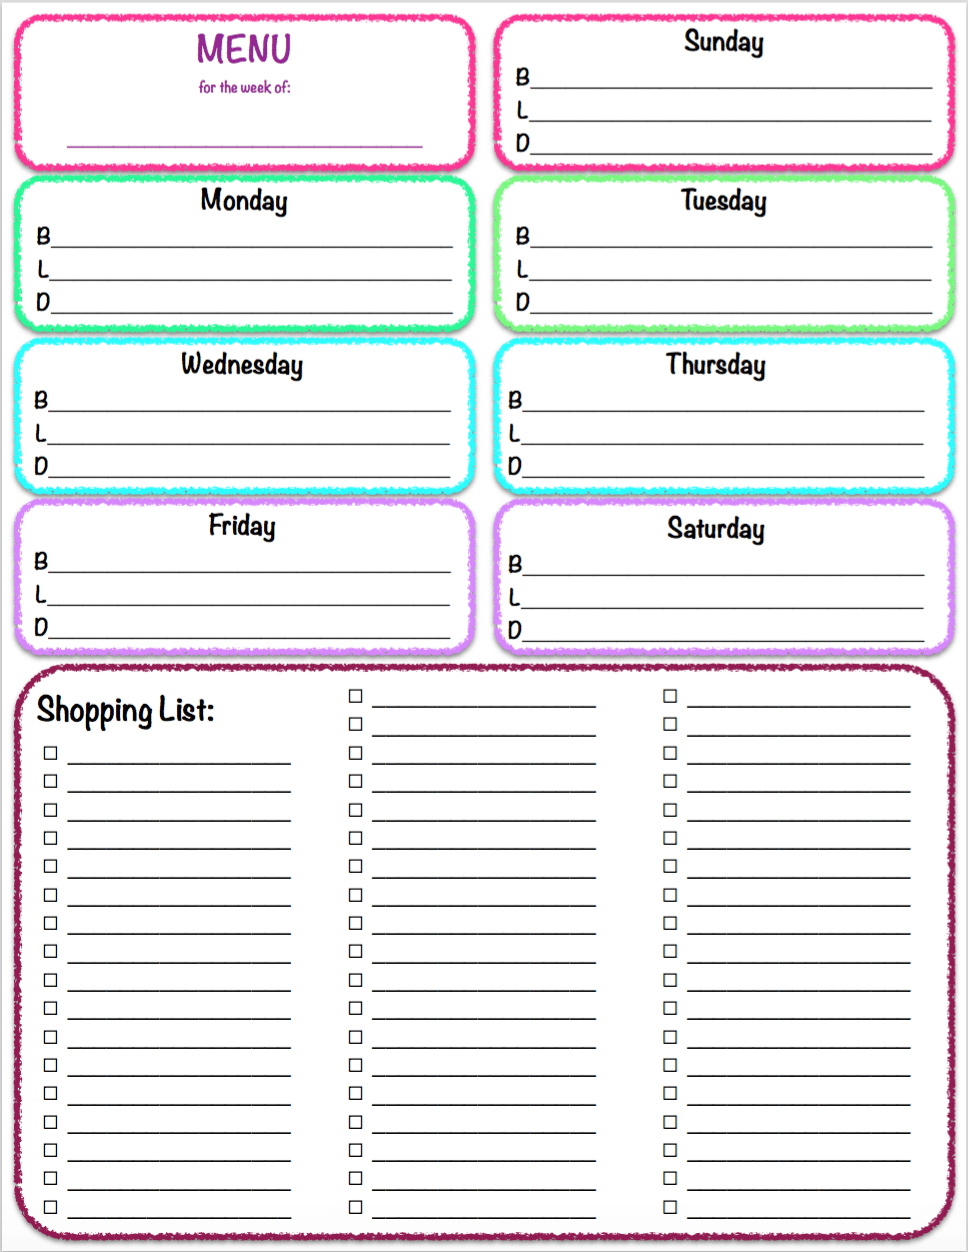 Free Printables: Weekly Meal Planner Grocery List ~ The Housewife Modern